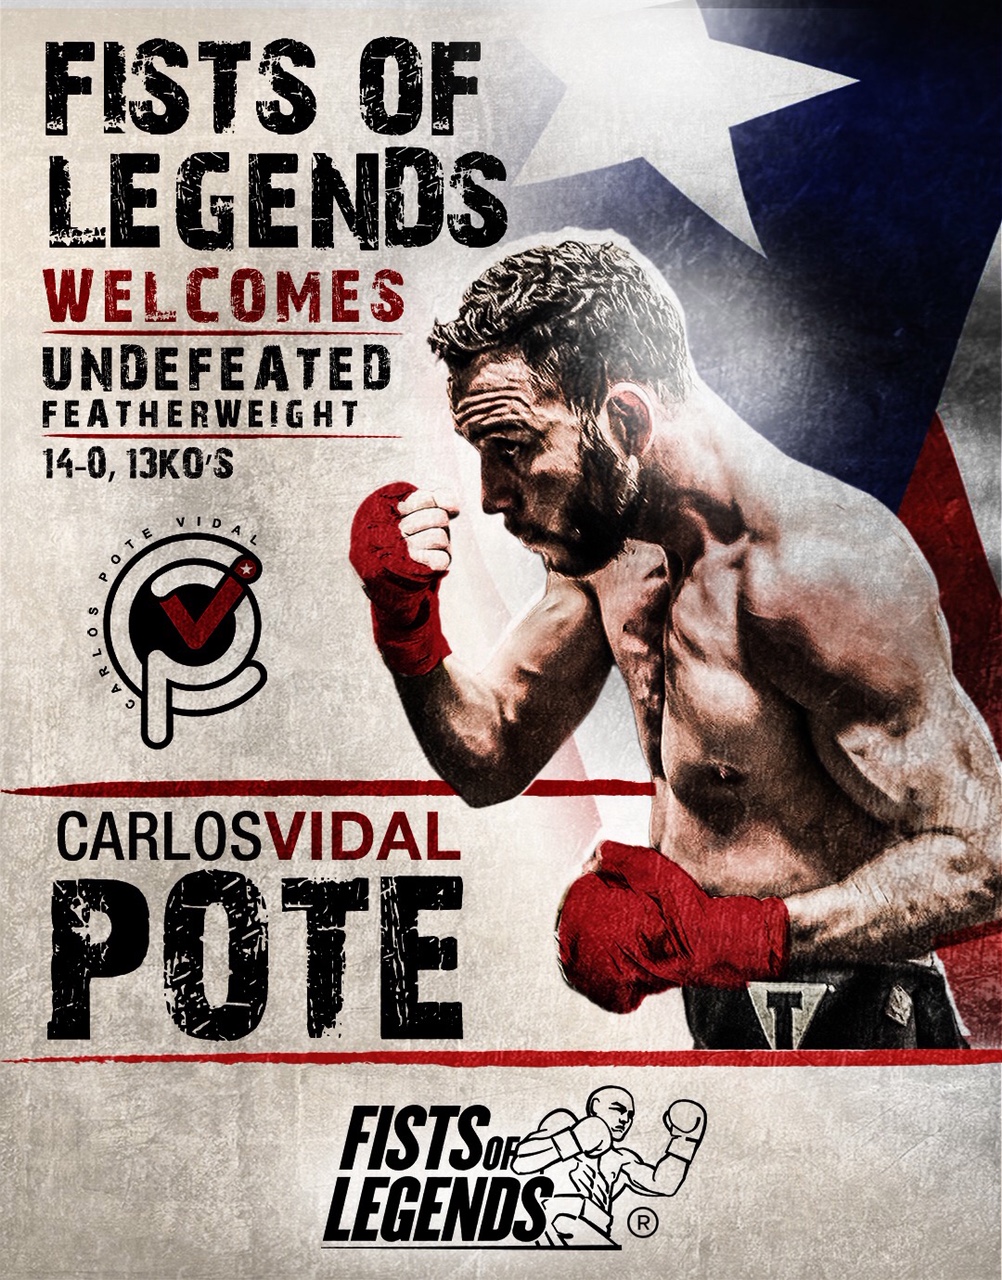 Carlos “POTE” Vidal Signs with Fists Of Legends